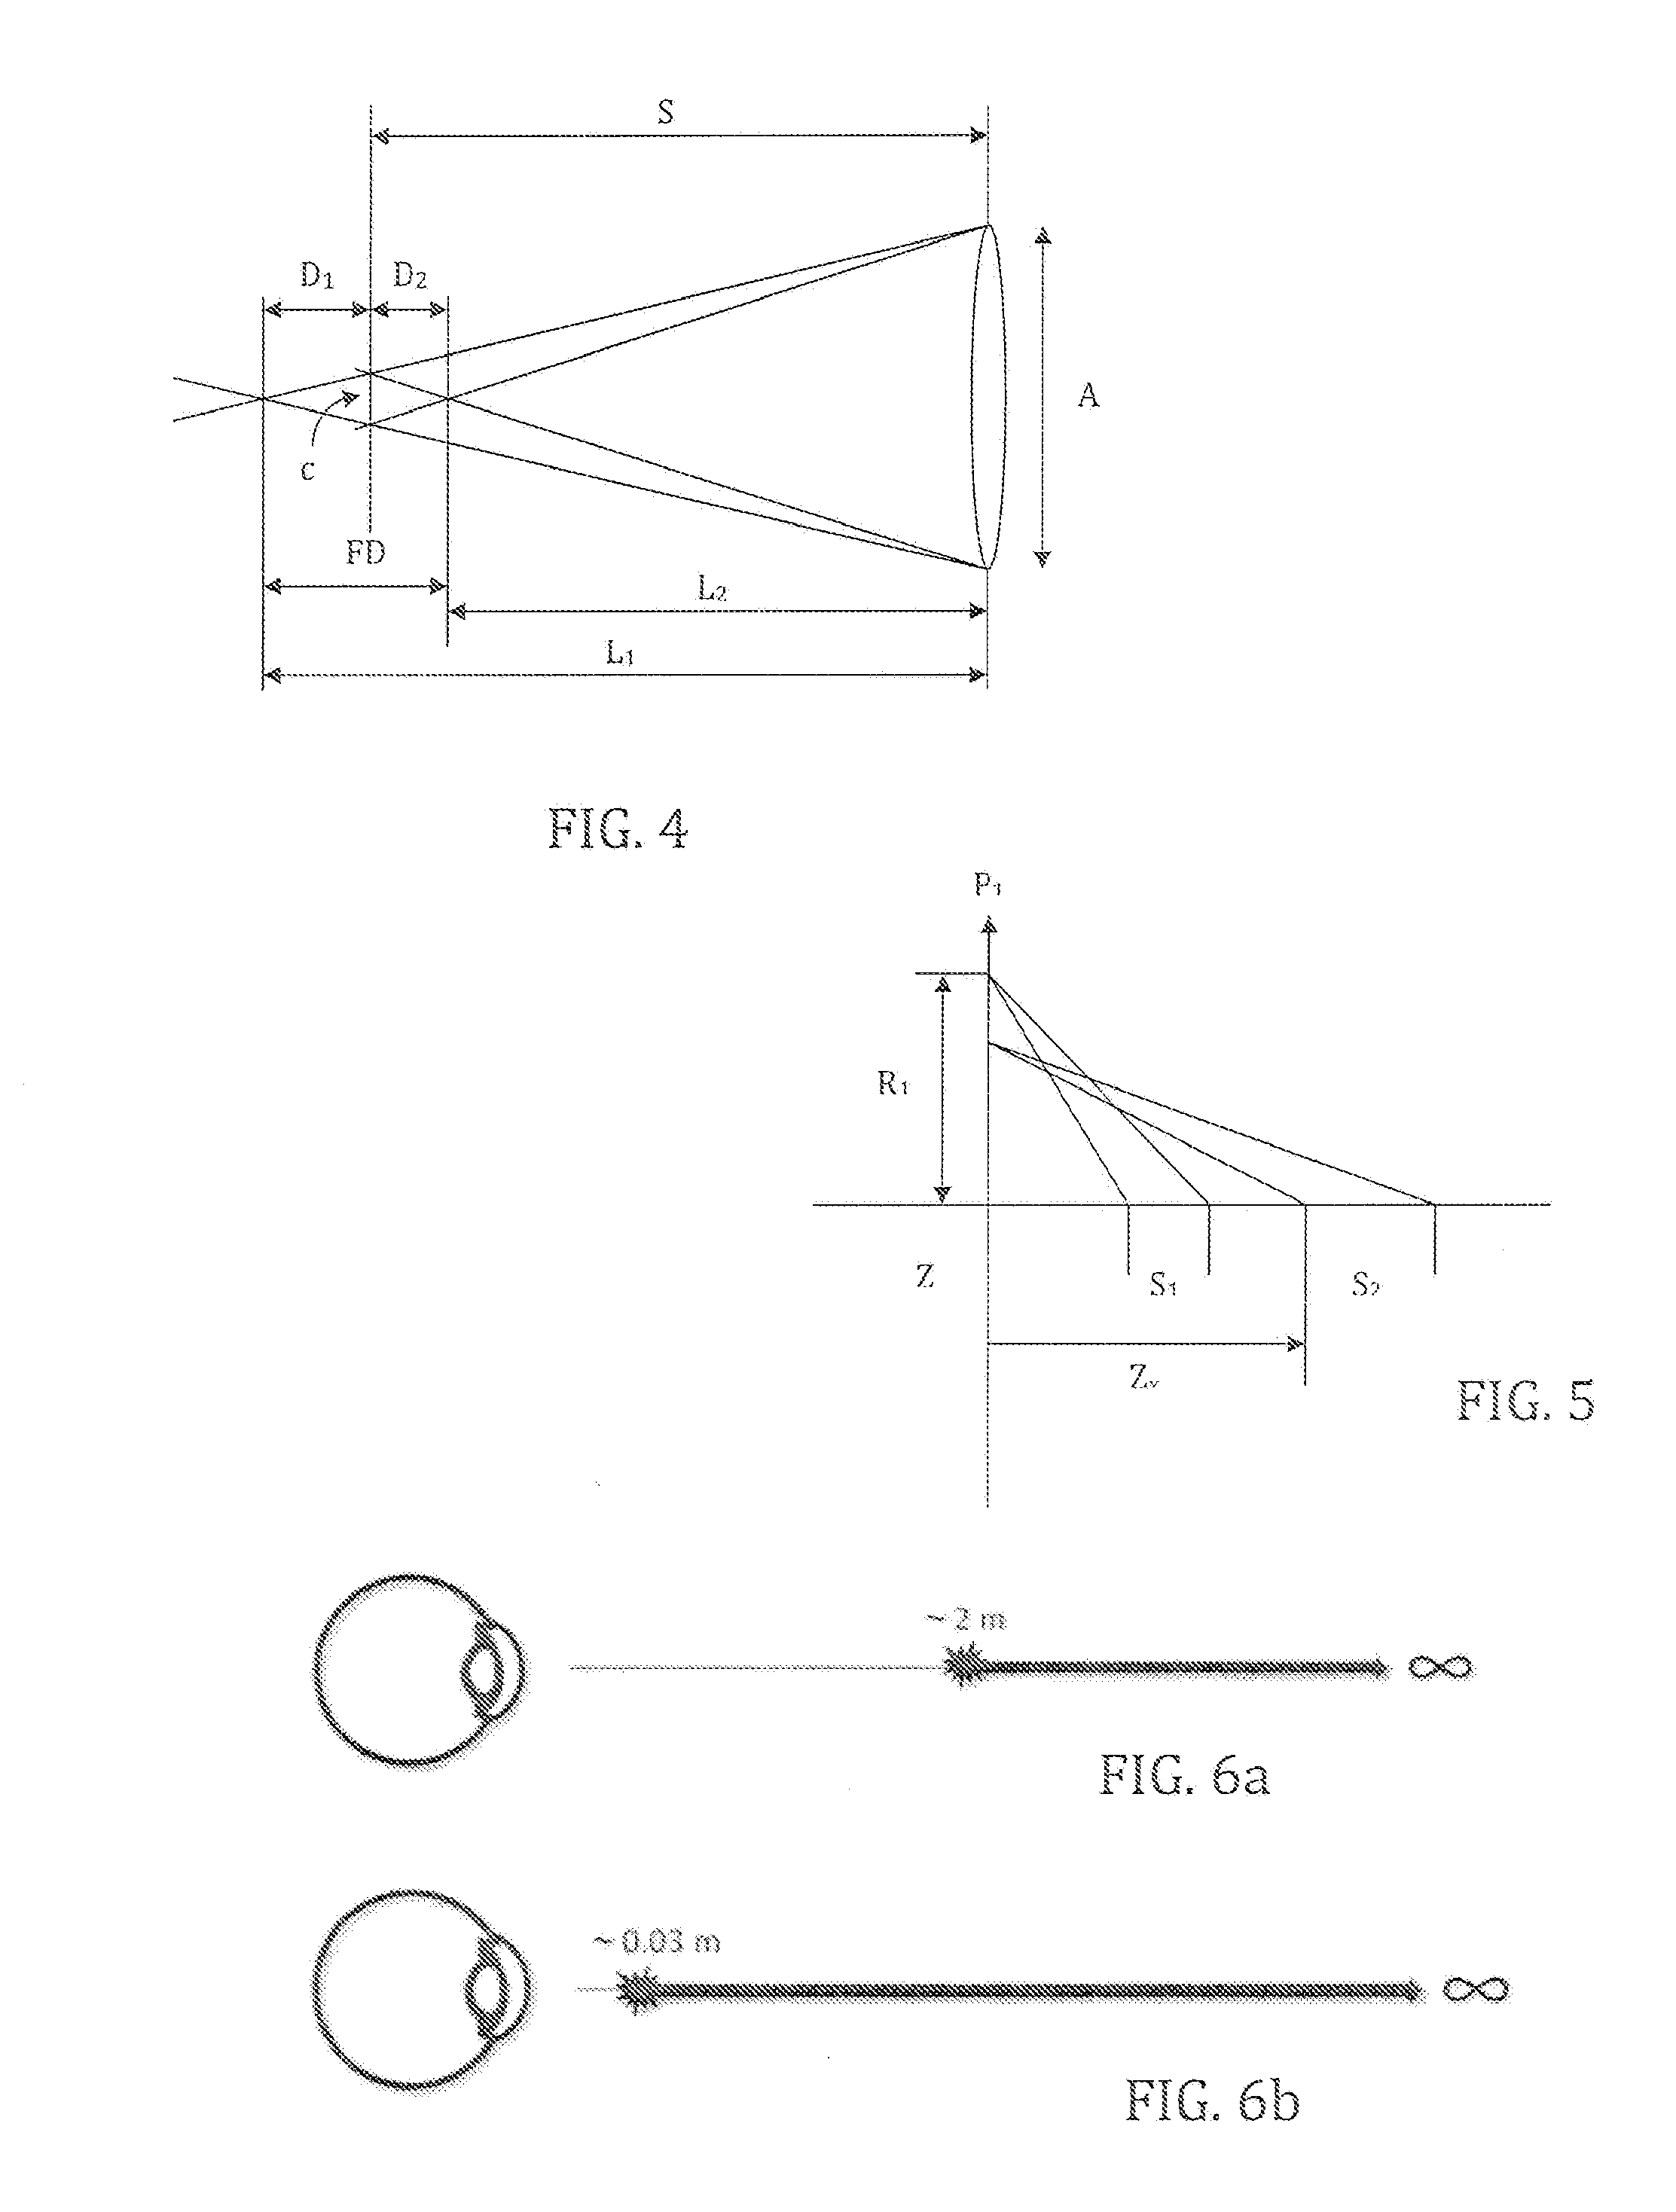 Method for determining the configuration of an ophthalmic lens, ophthalmic lens produced according to said method, and method for producing said lens